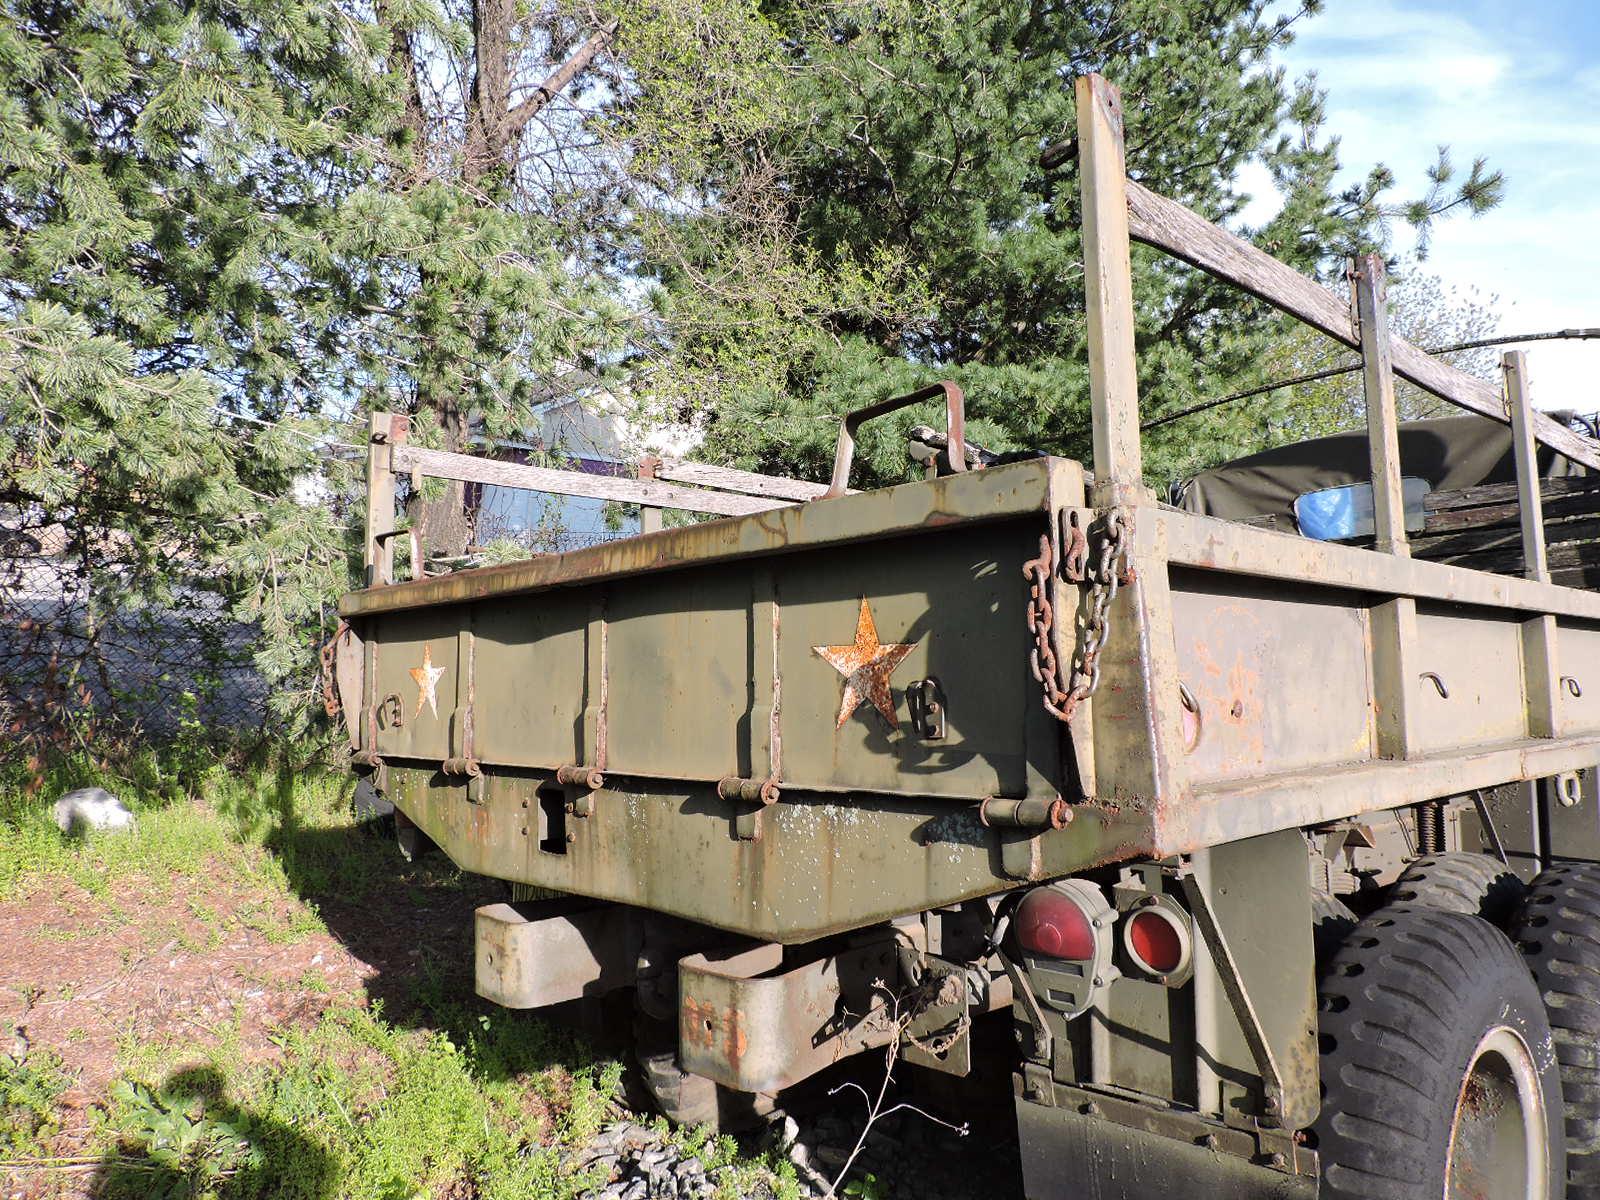 1952 GMC Model M211 - US Army 'Duce and a Half'